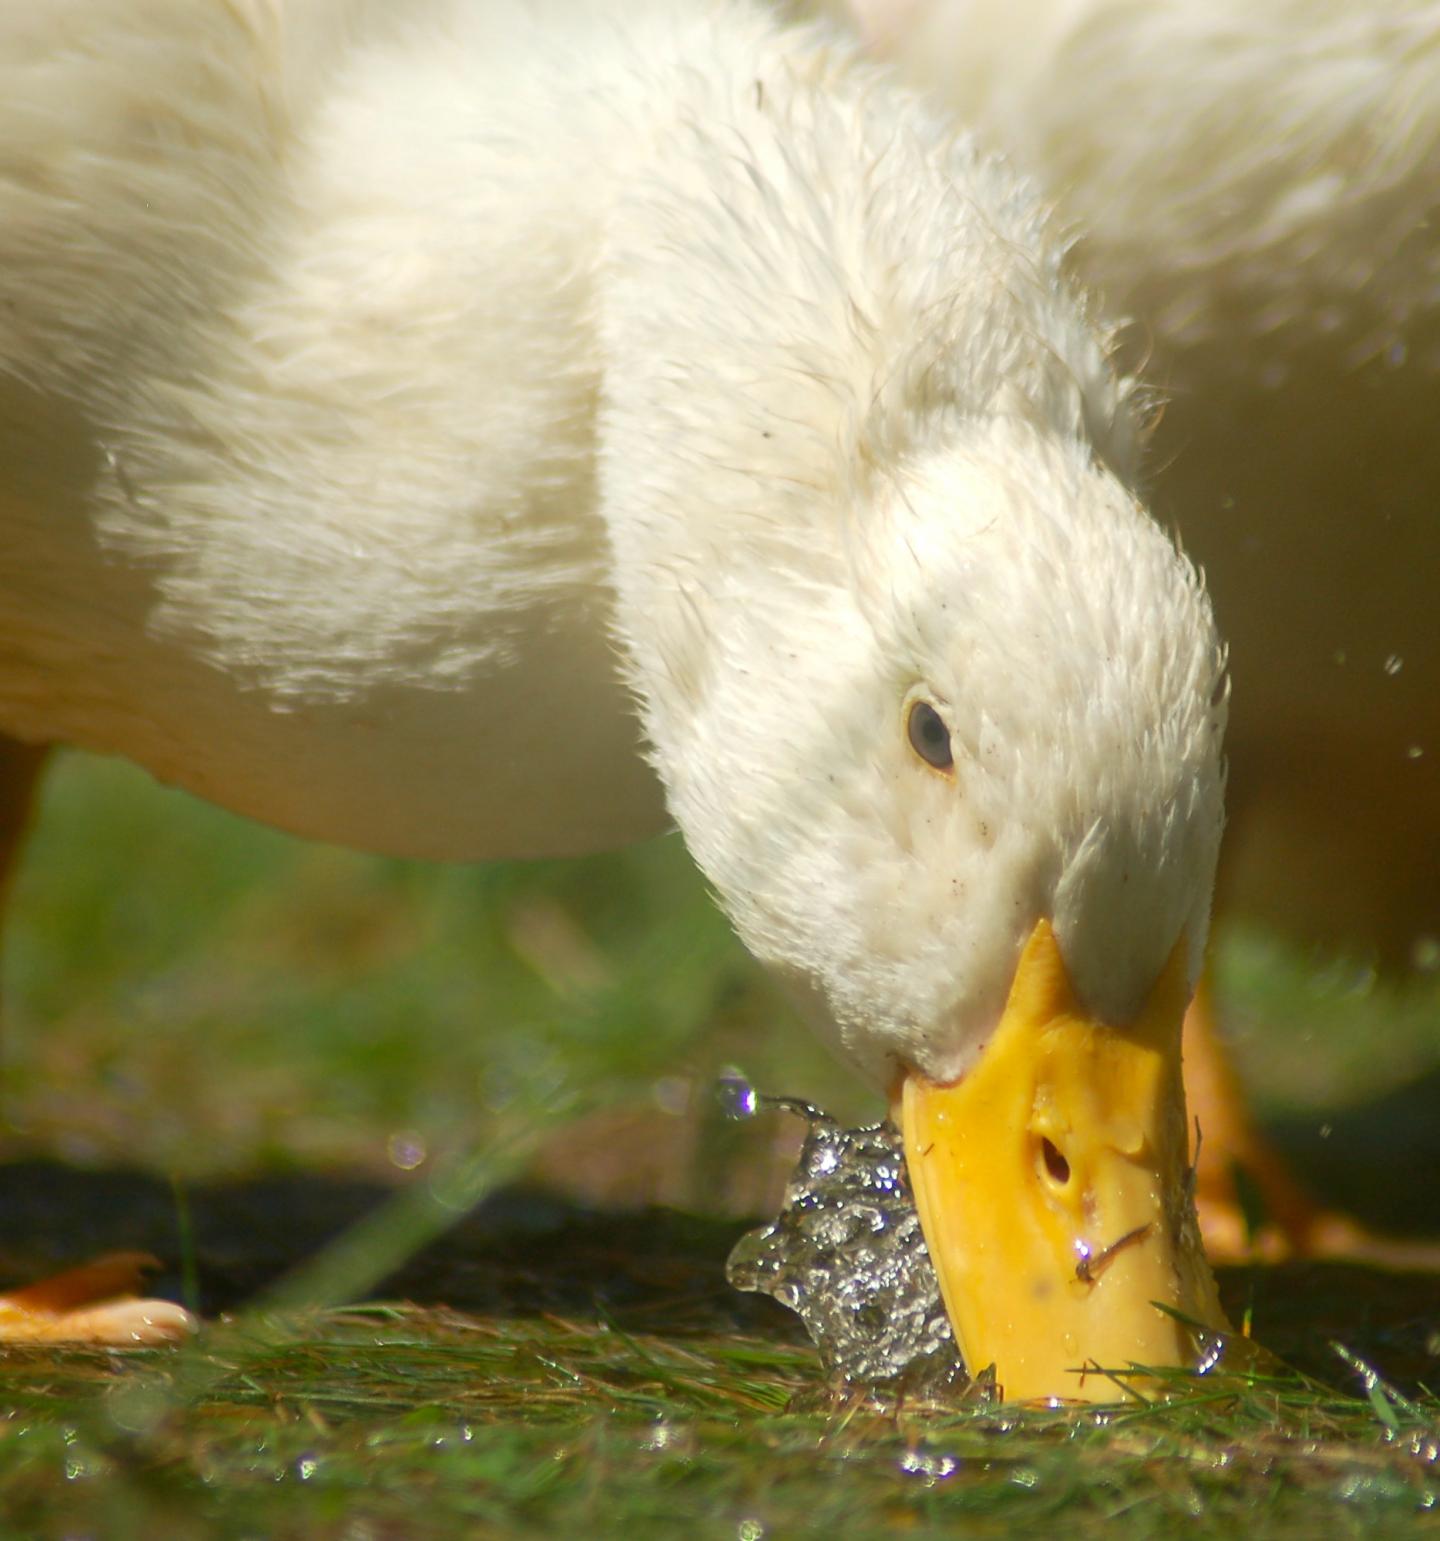 Domestic Ducks Rely on Their Acutely Mechanosensitive Bill for Foraging